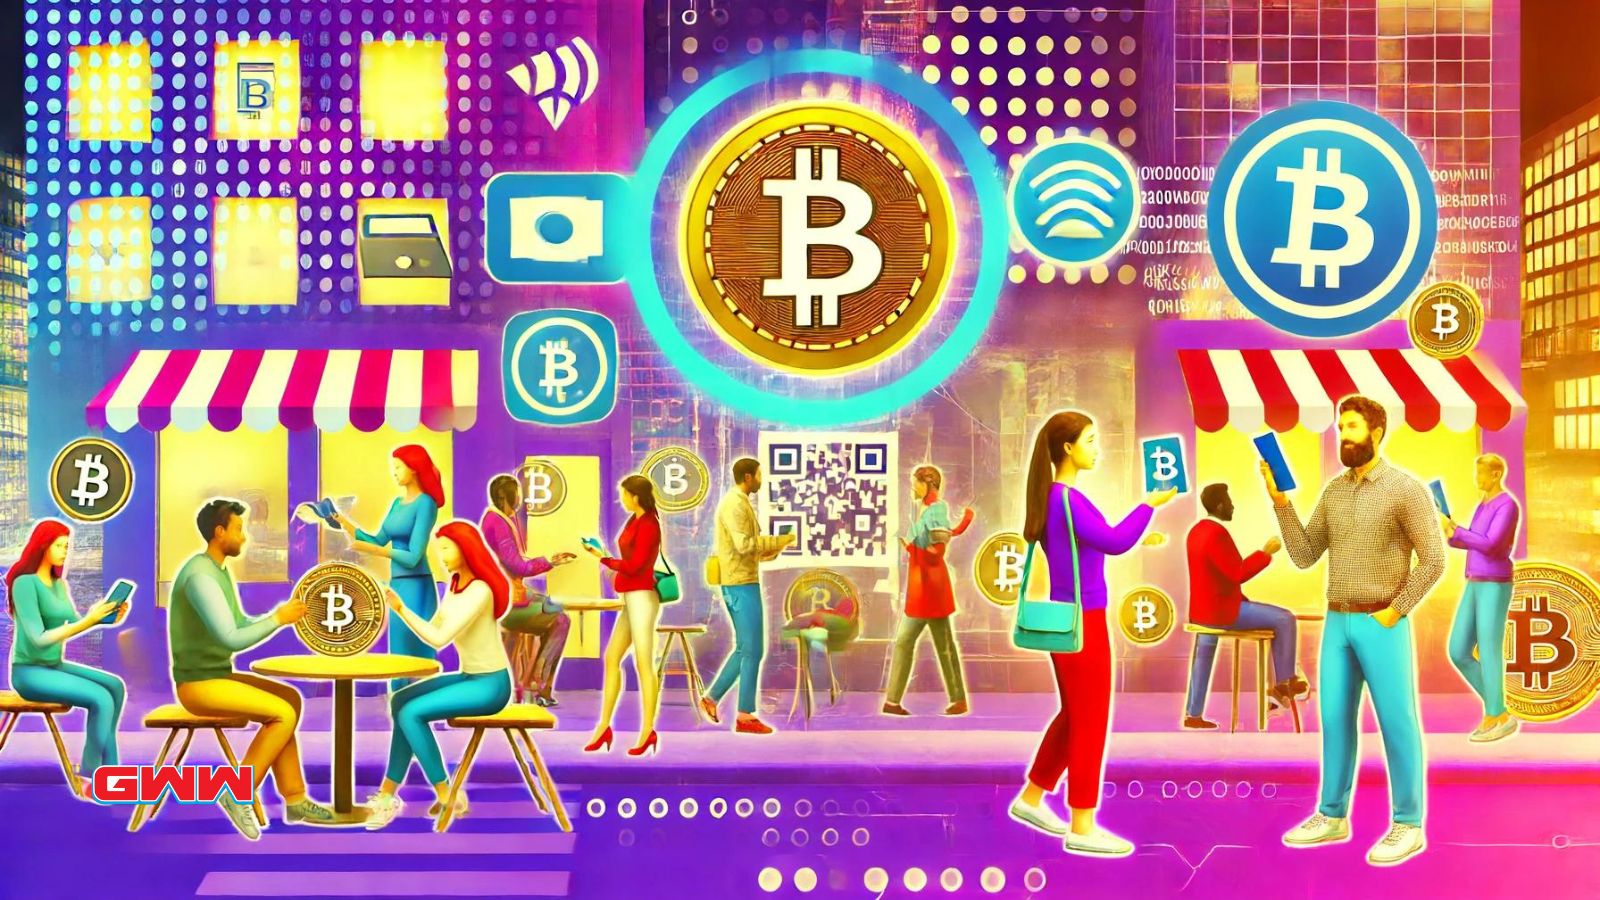 People using Bitcoin for transactions in a colorful digital marketplace